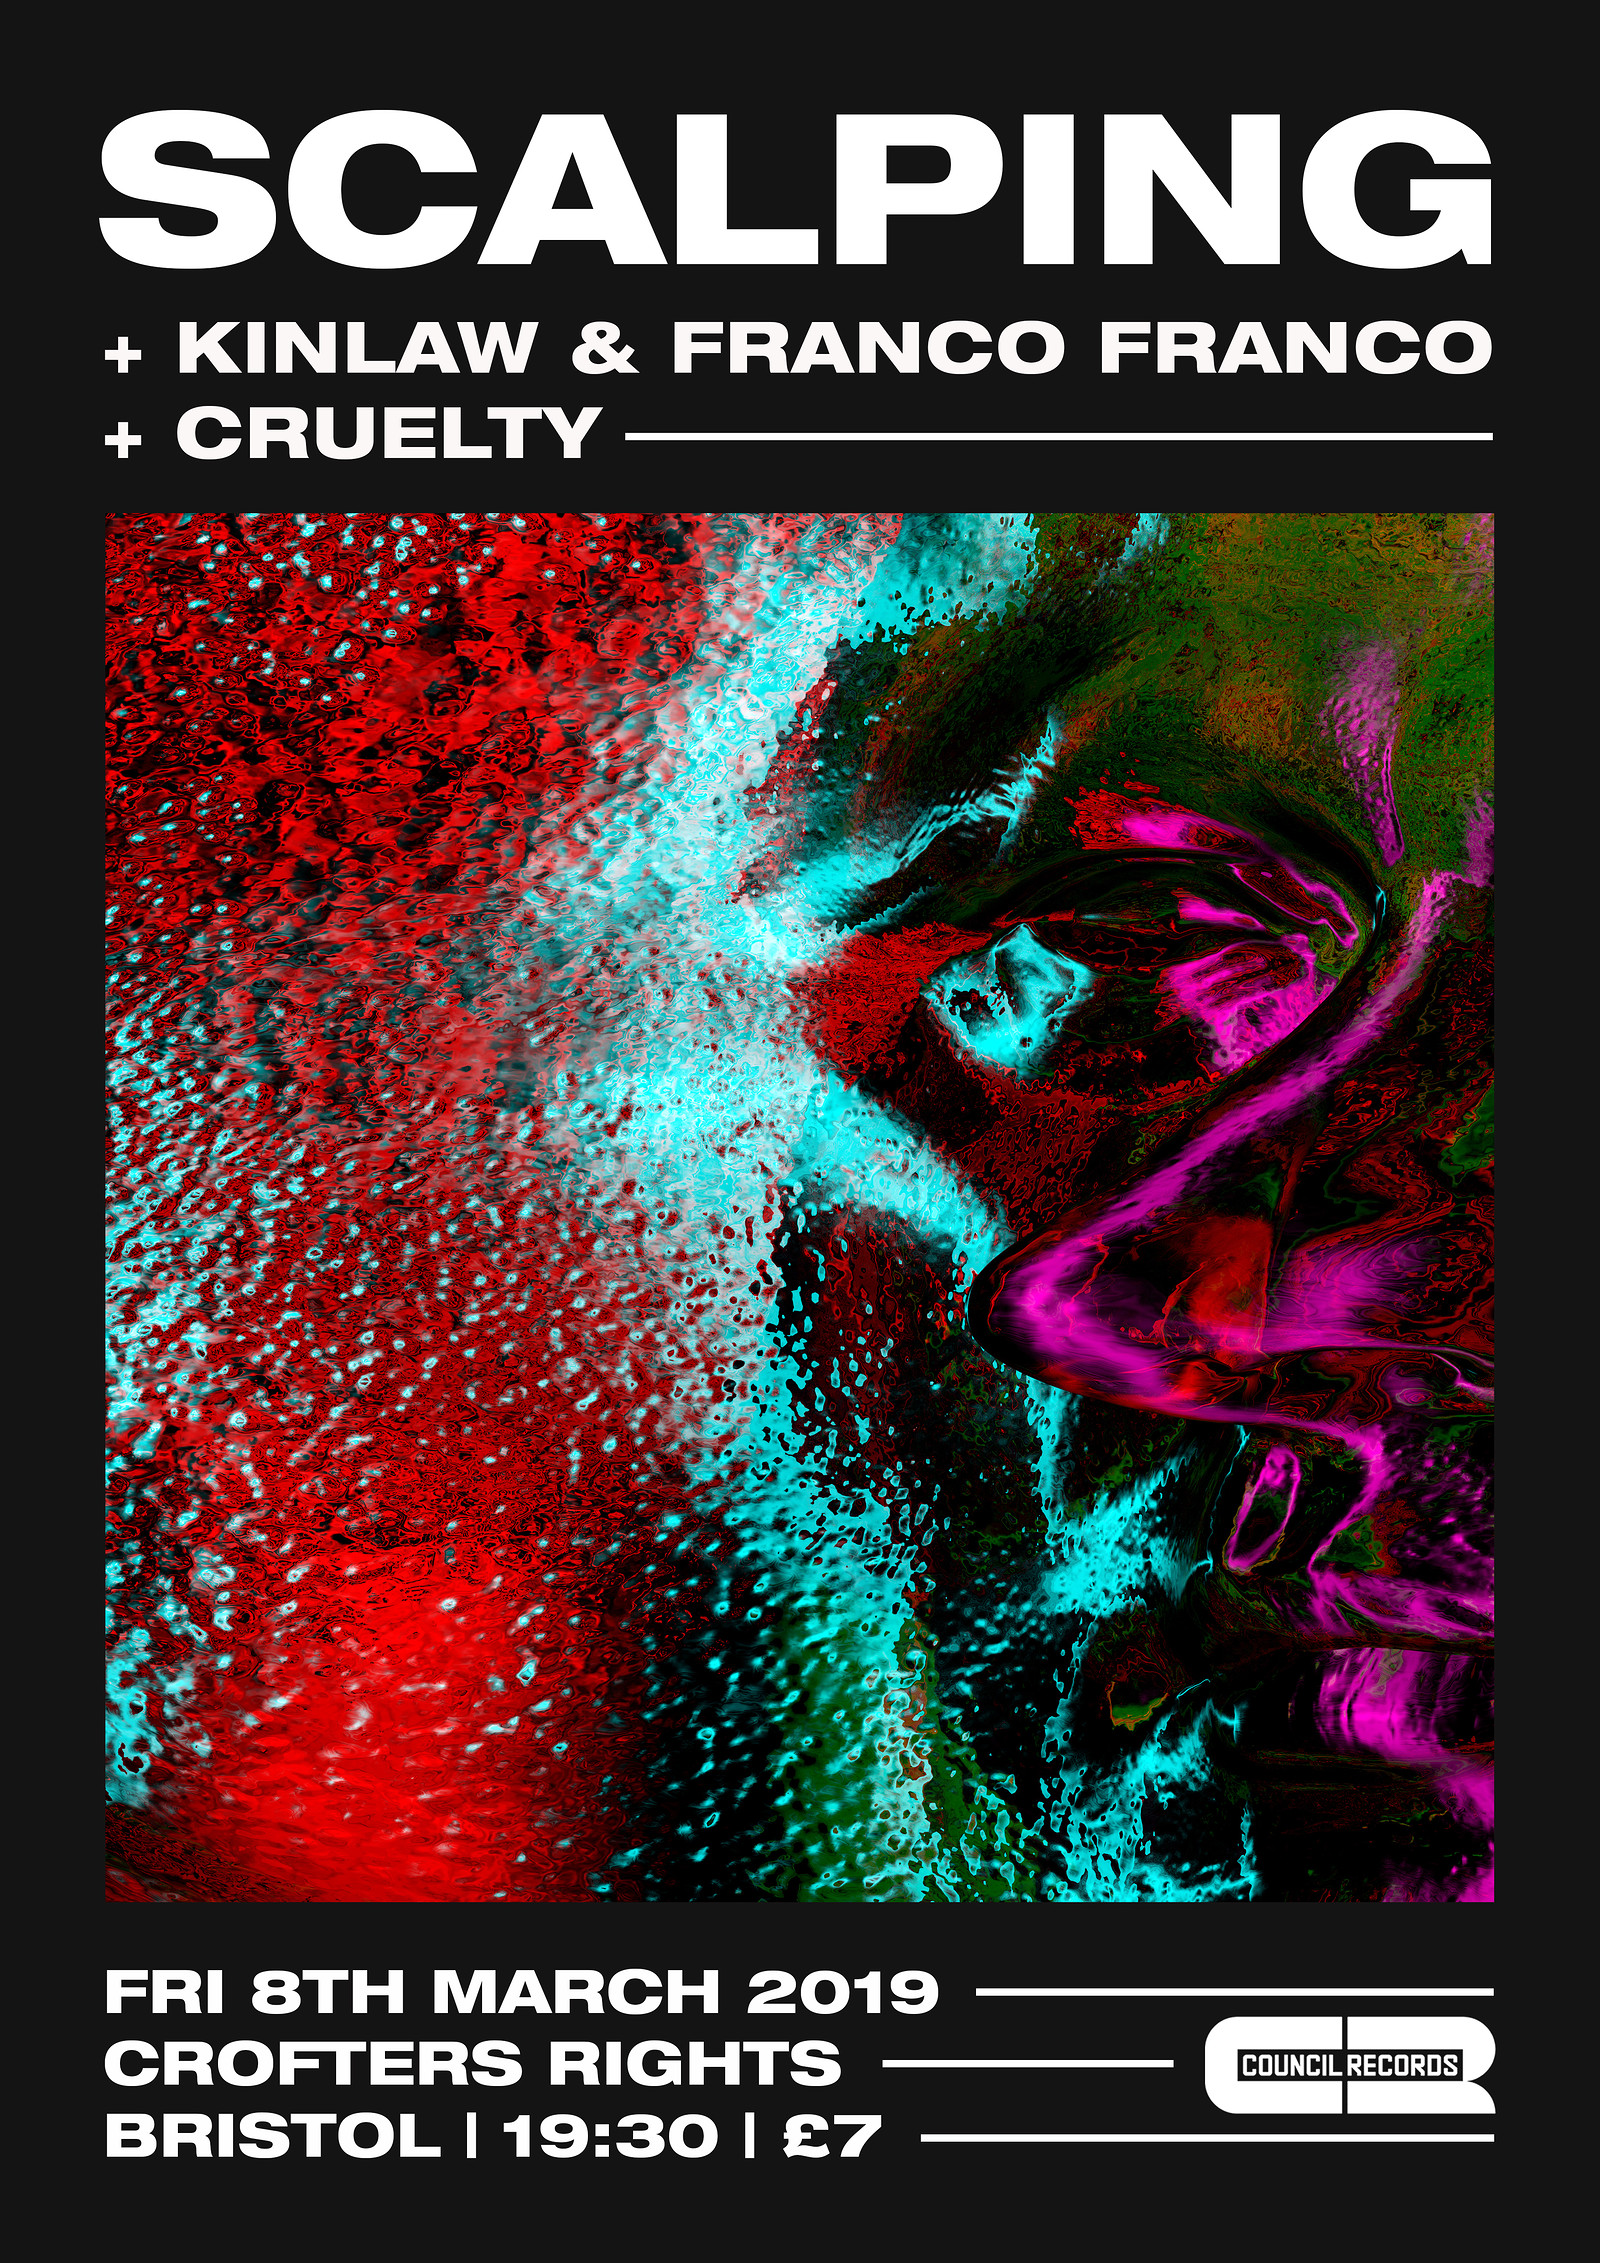 SCALPING plus Kinlaw & Franco Franco + Cruelty at Crofters Rights